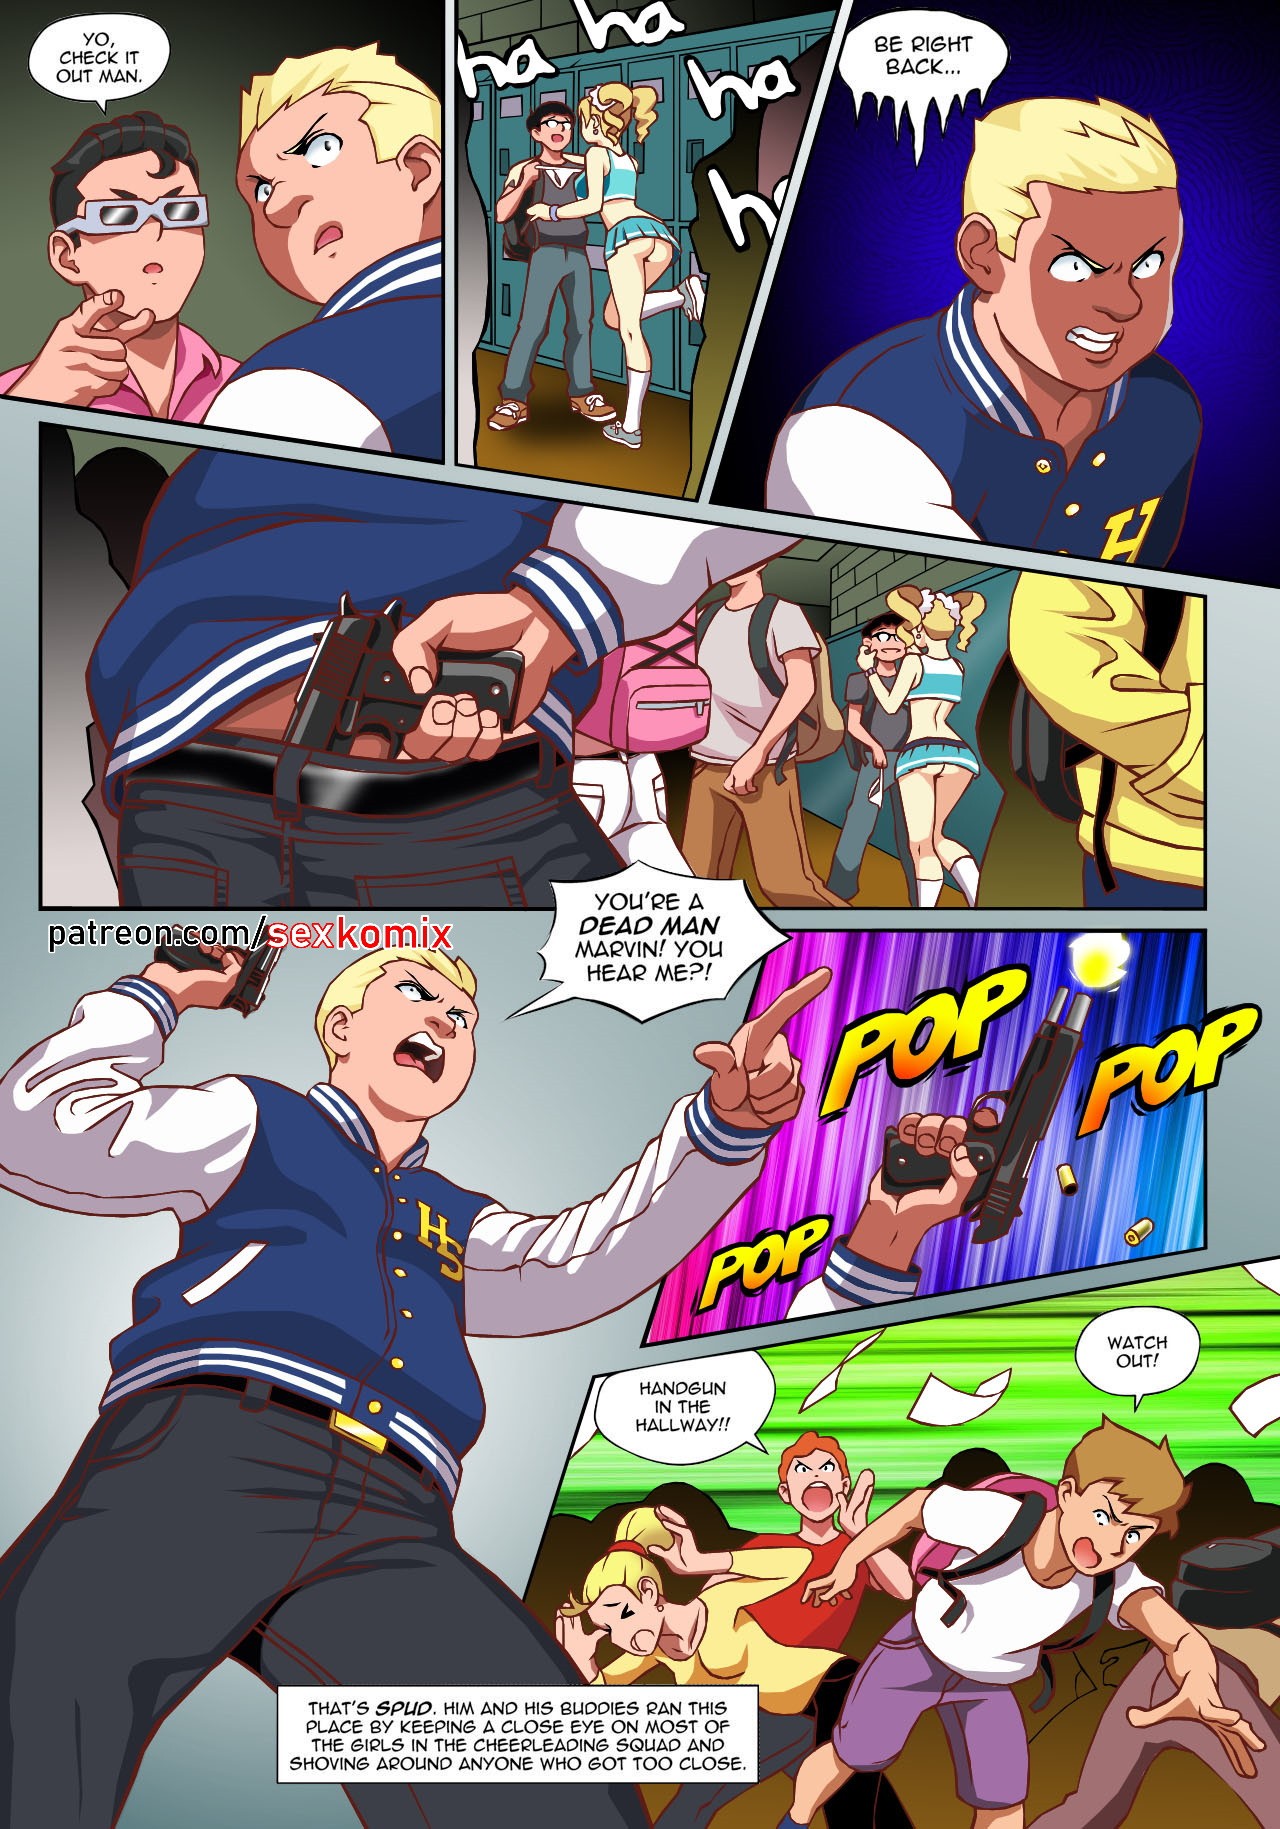 Hot Shit High! - Chapter 1 porn comic picture 5